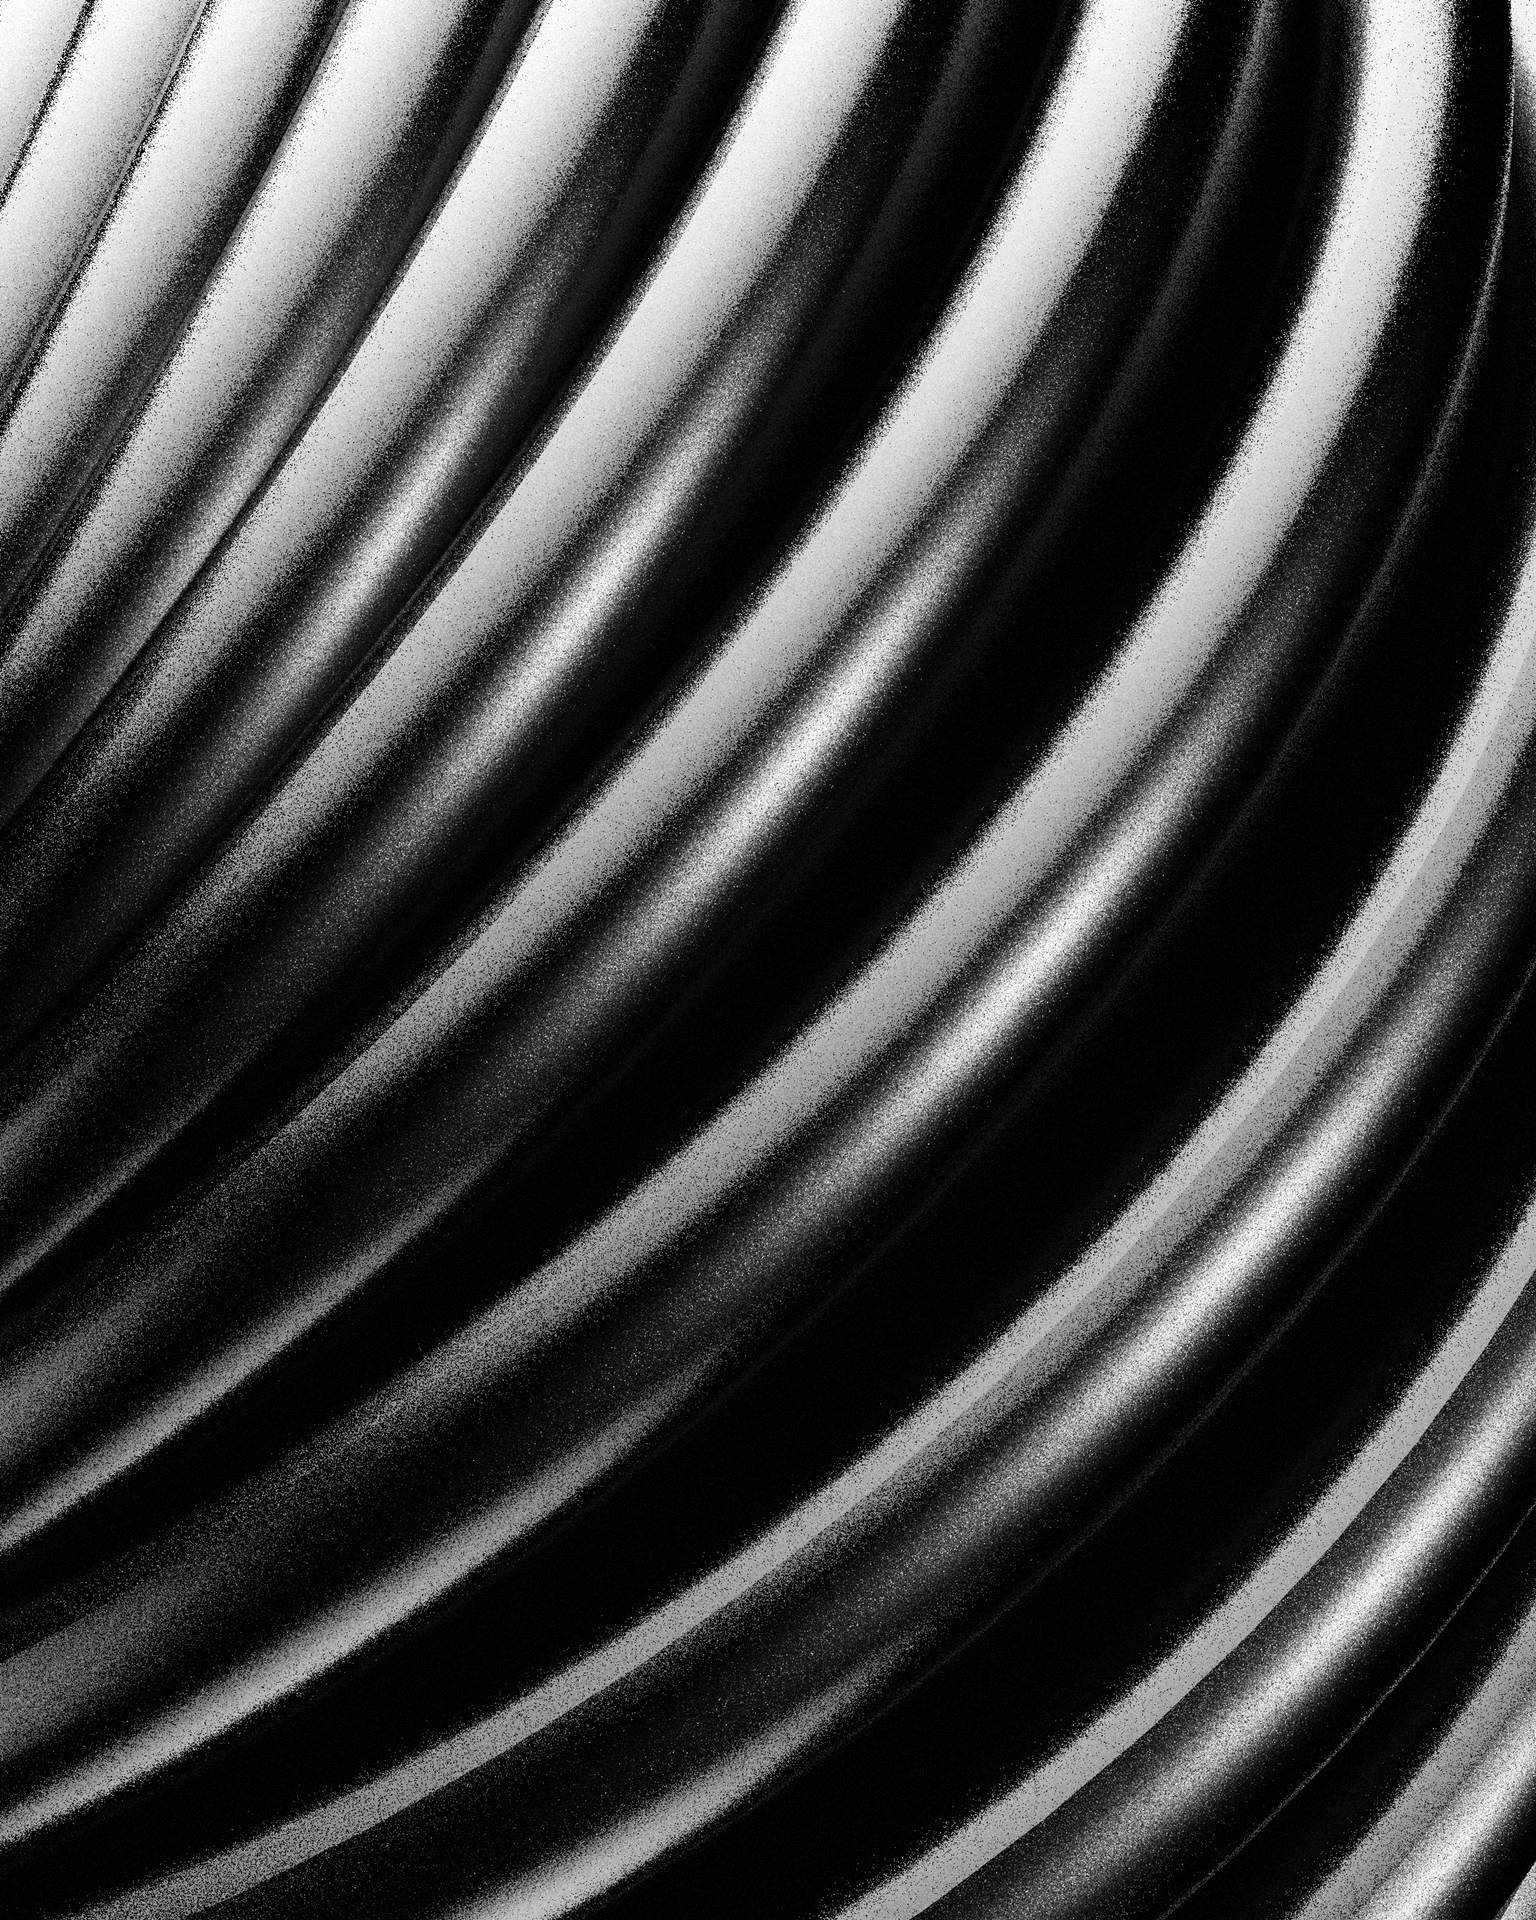 Black And White Pipes Cg Artwork Wallpaper